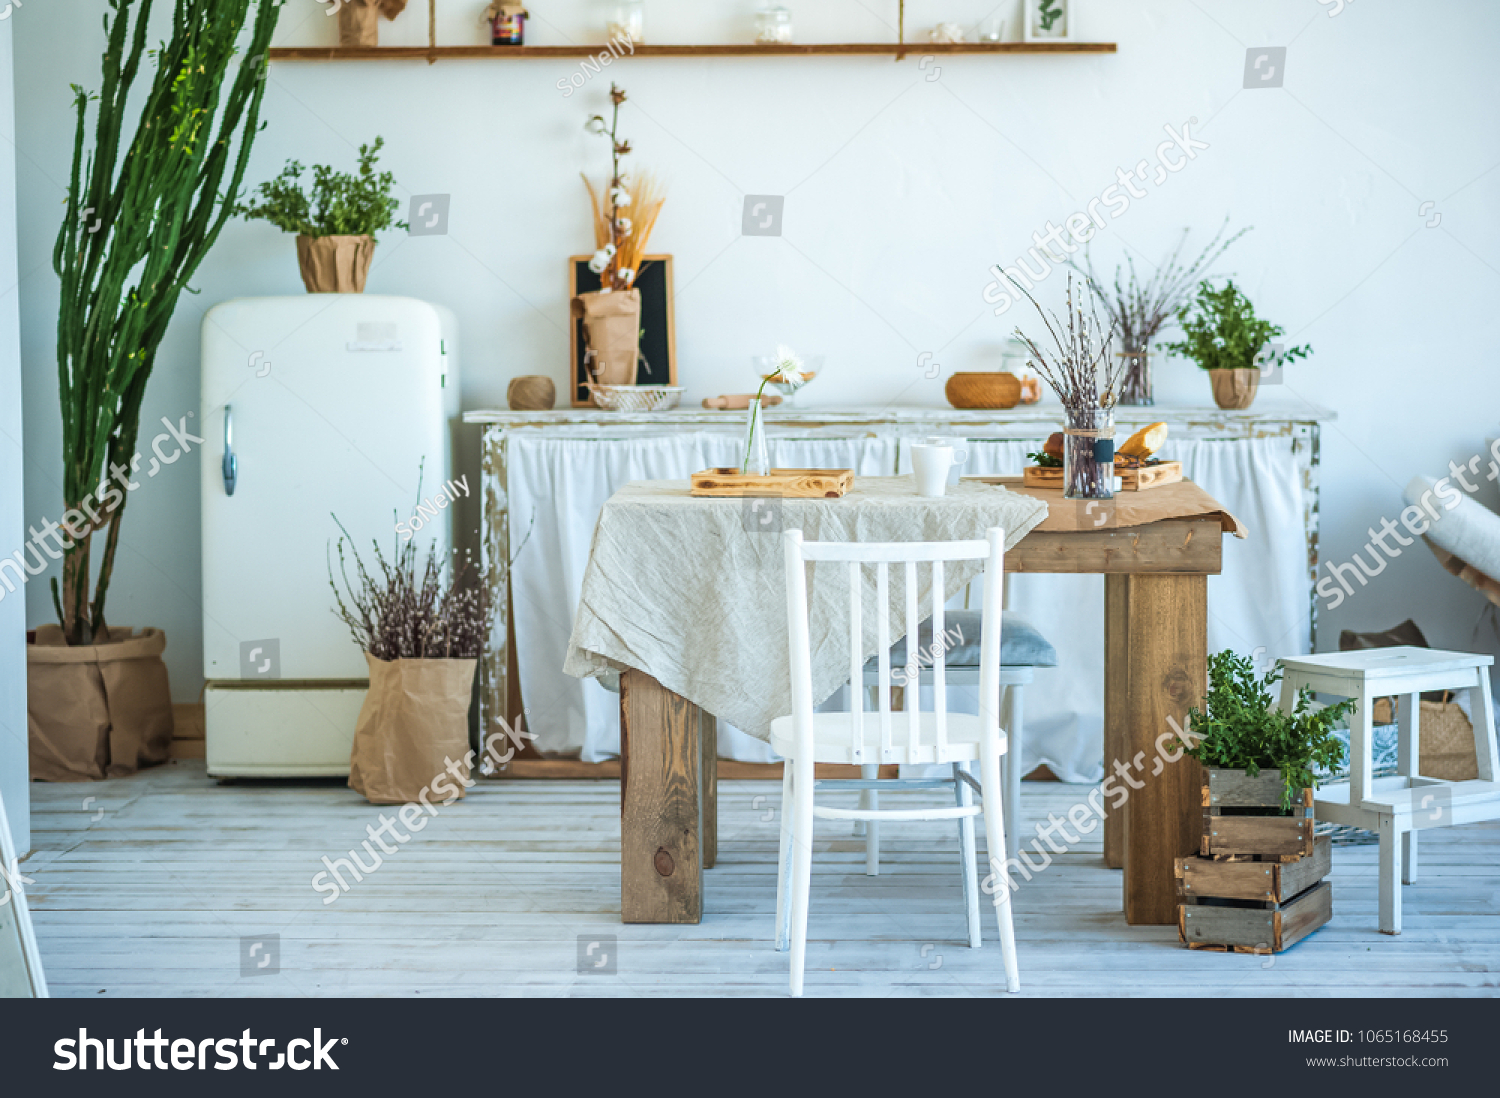 Beautiful spring photo of kitchen interior in light textured colors. Kitchen, living room with beige sofa sofa, old retro white fridge, rustic table, large cactus and woven macrame on the wall #1065168455